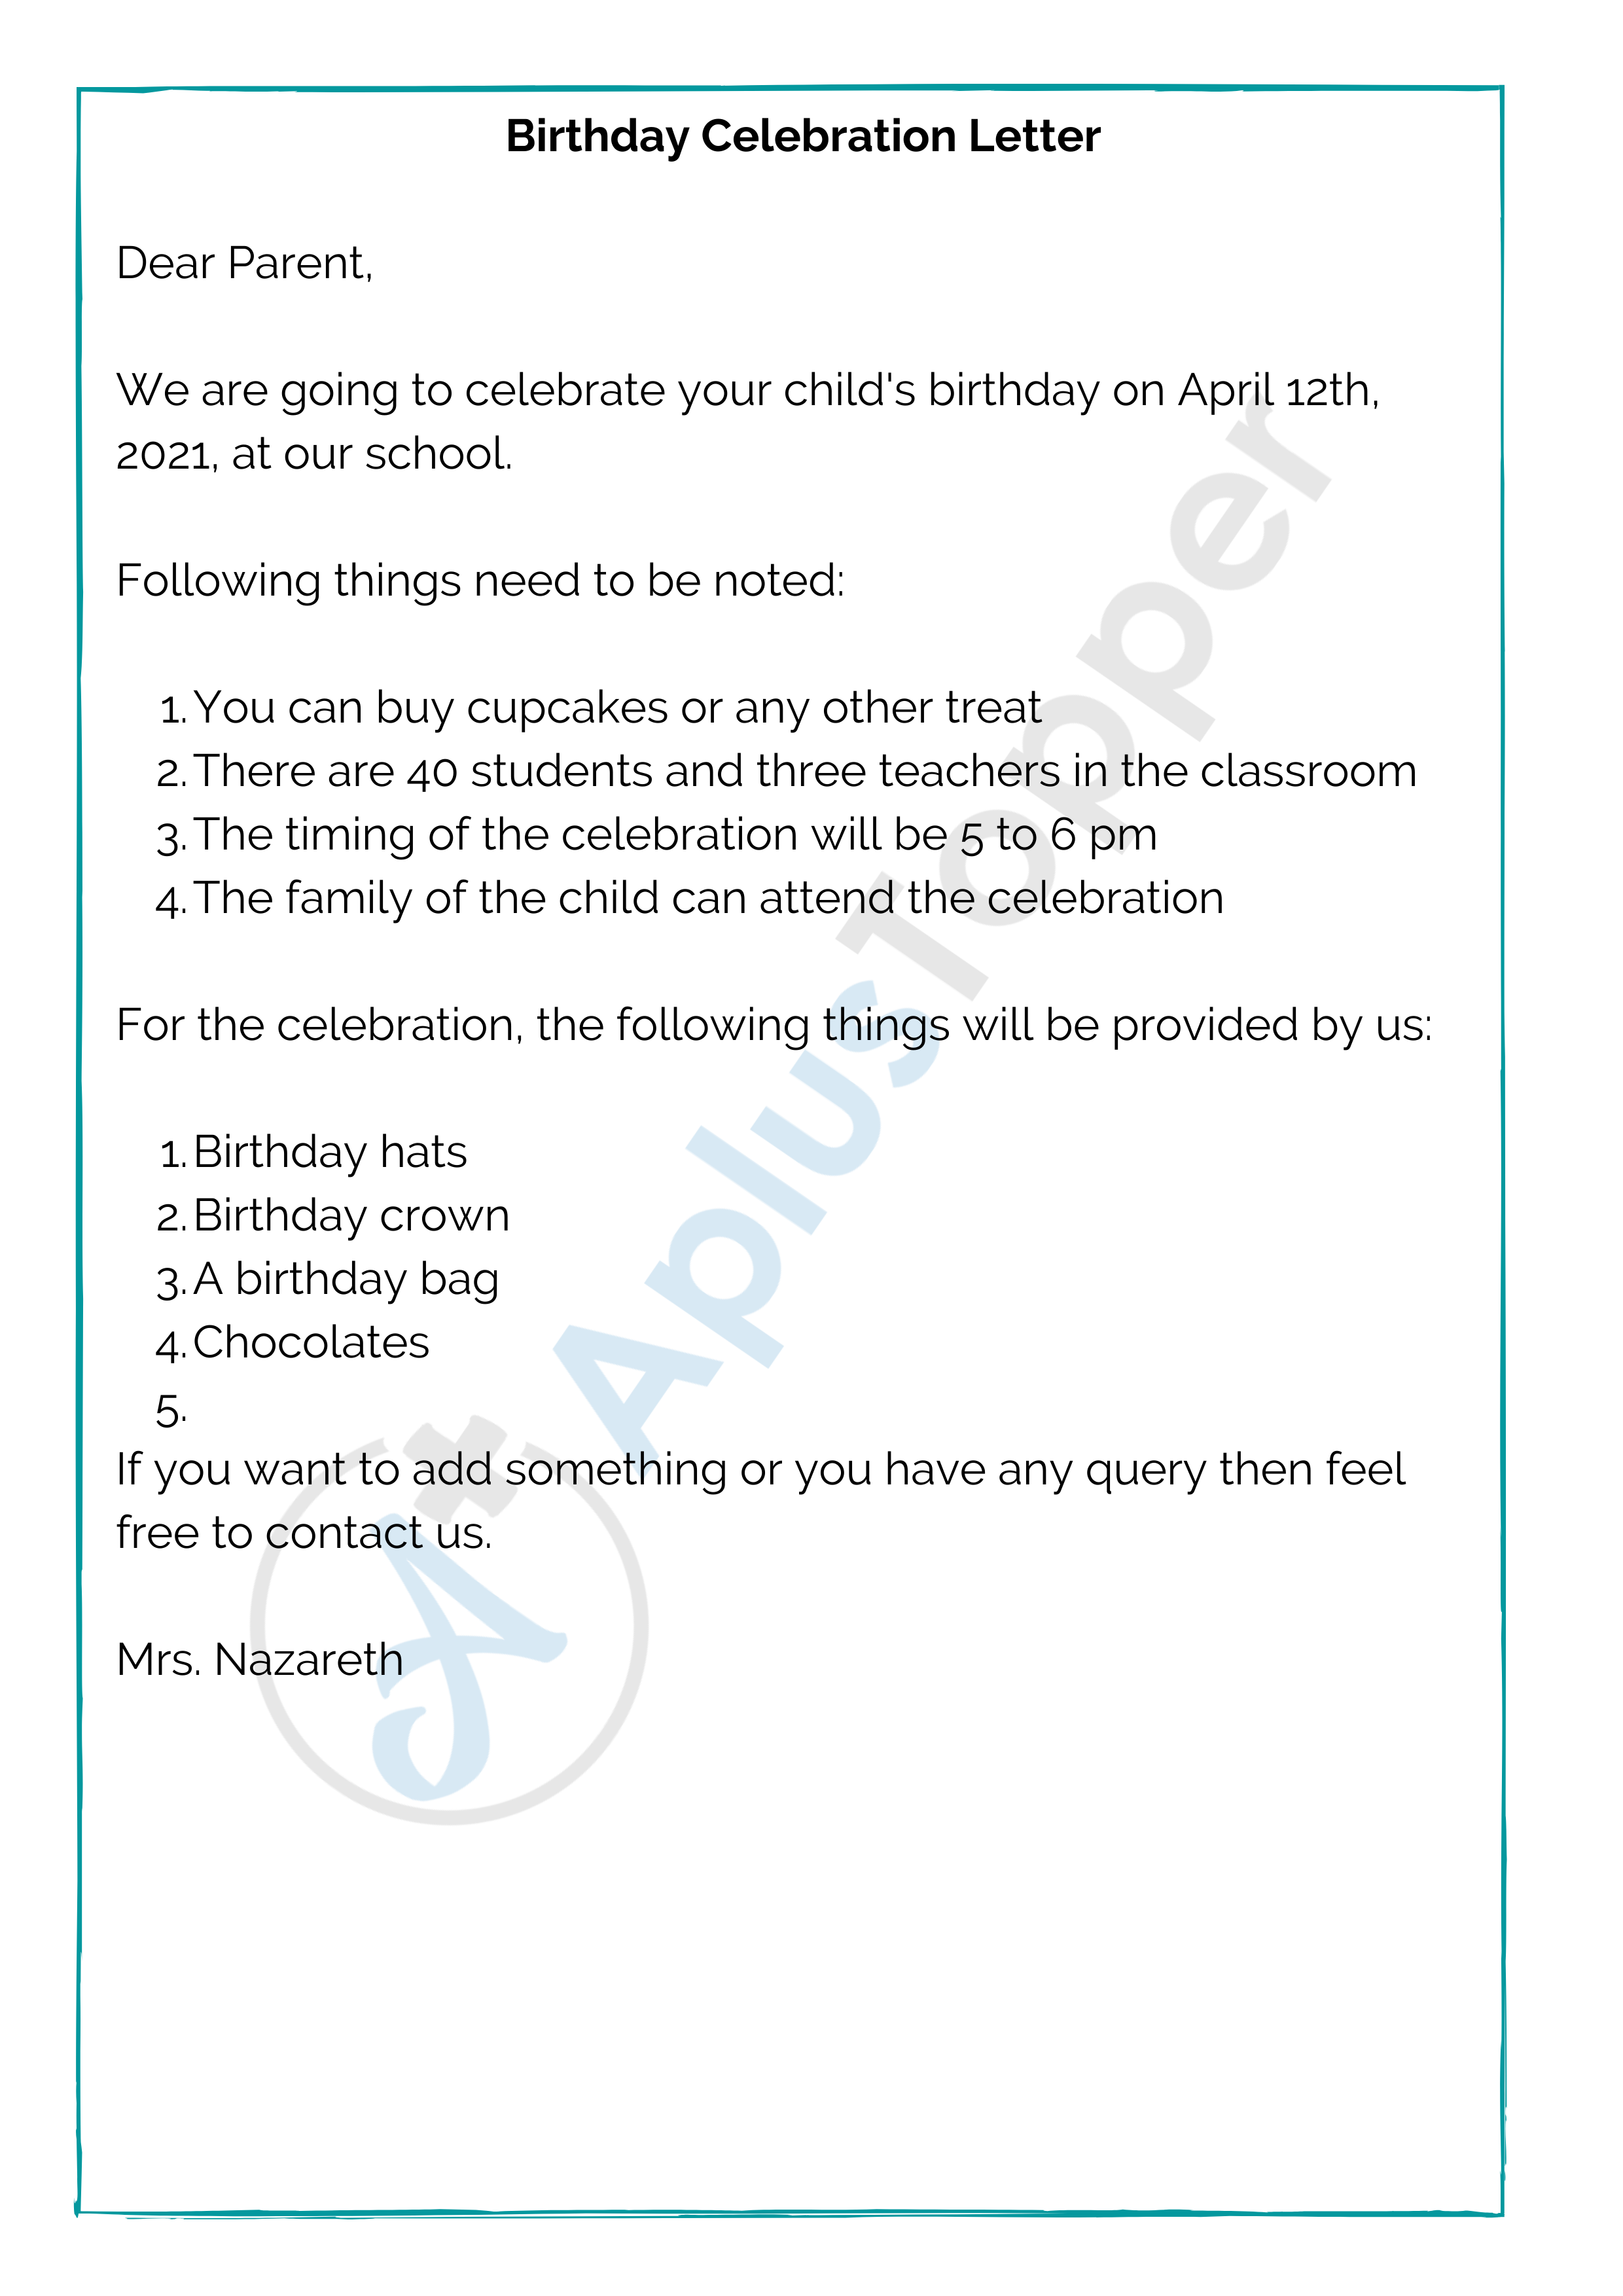 Sample Celebration Letters | Format, Template and How To Write